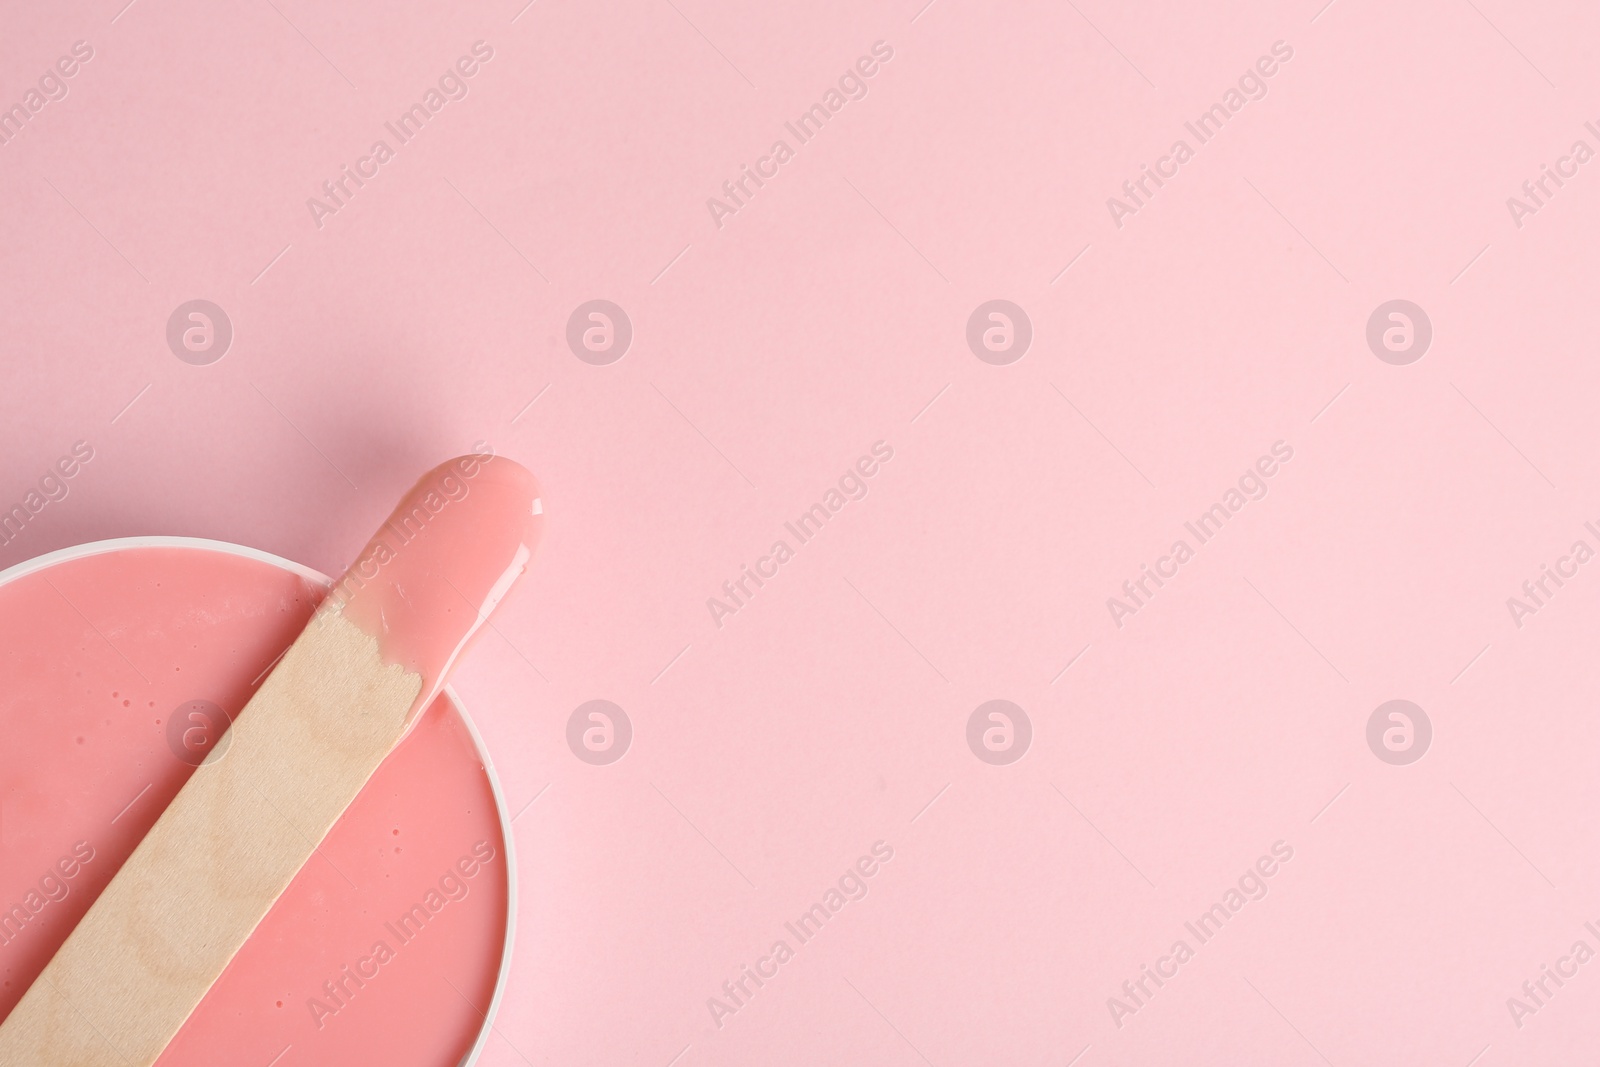 Photo of Wooden spatula and hot depilatory wax on light pink background, top view. Space for text